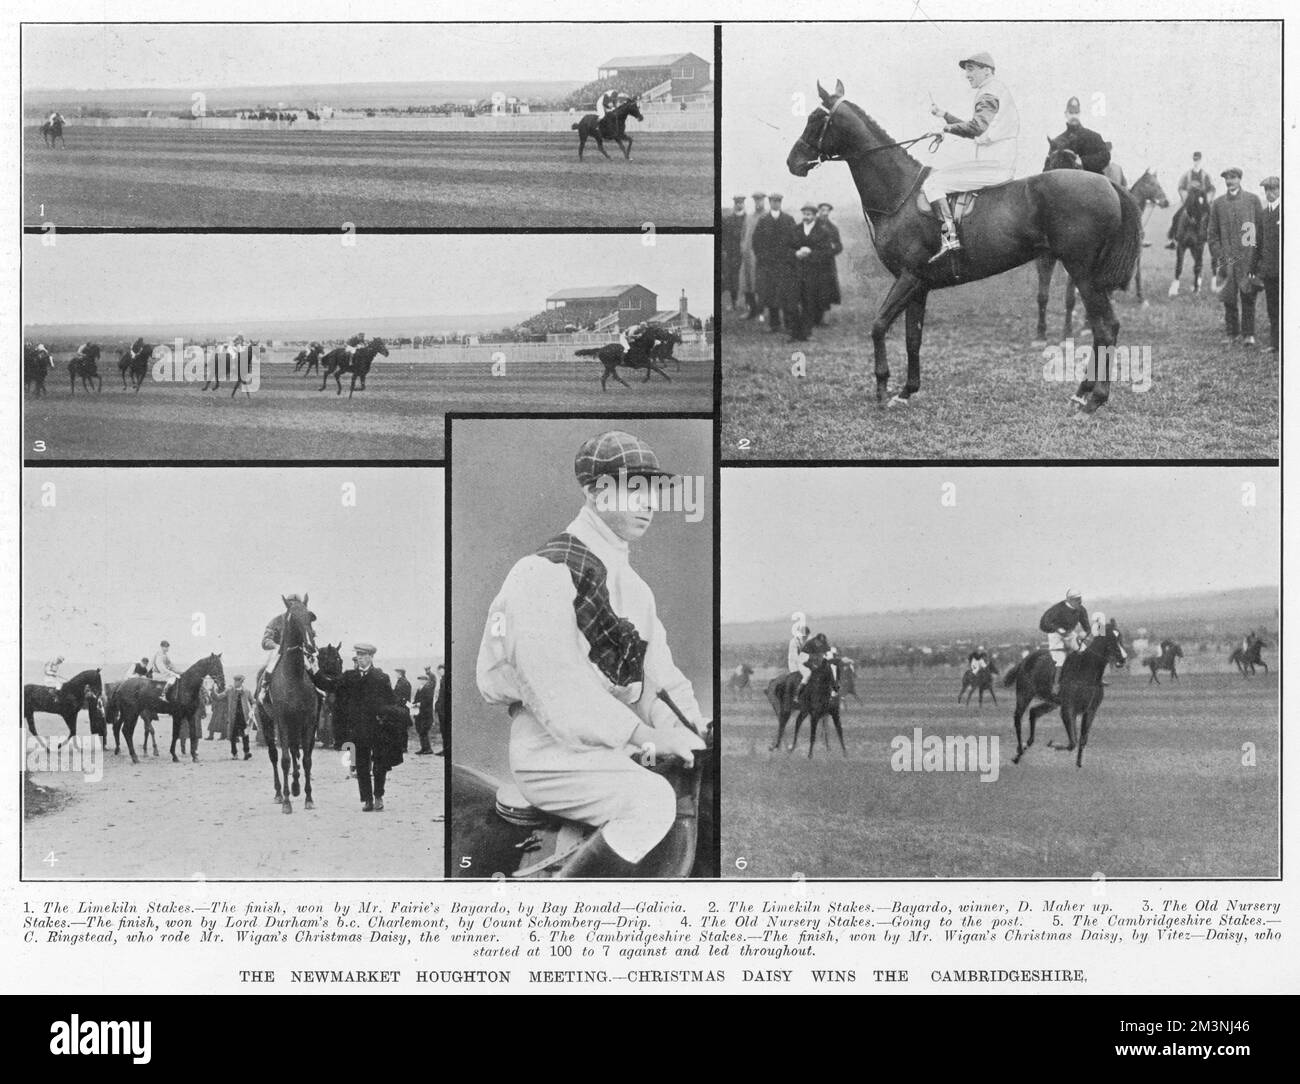 Various horse races relating to the Newmarket Houghton meeting, including the Limekiln Stakes won by Mr Fairie's 'Bayardo', The Old Nursery Stakes won by 'Charlemont' and The Cambridgeshire Stakes won by 'Christmas Daisy'.     Date: 1909 Stock Photo